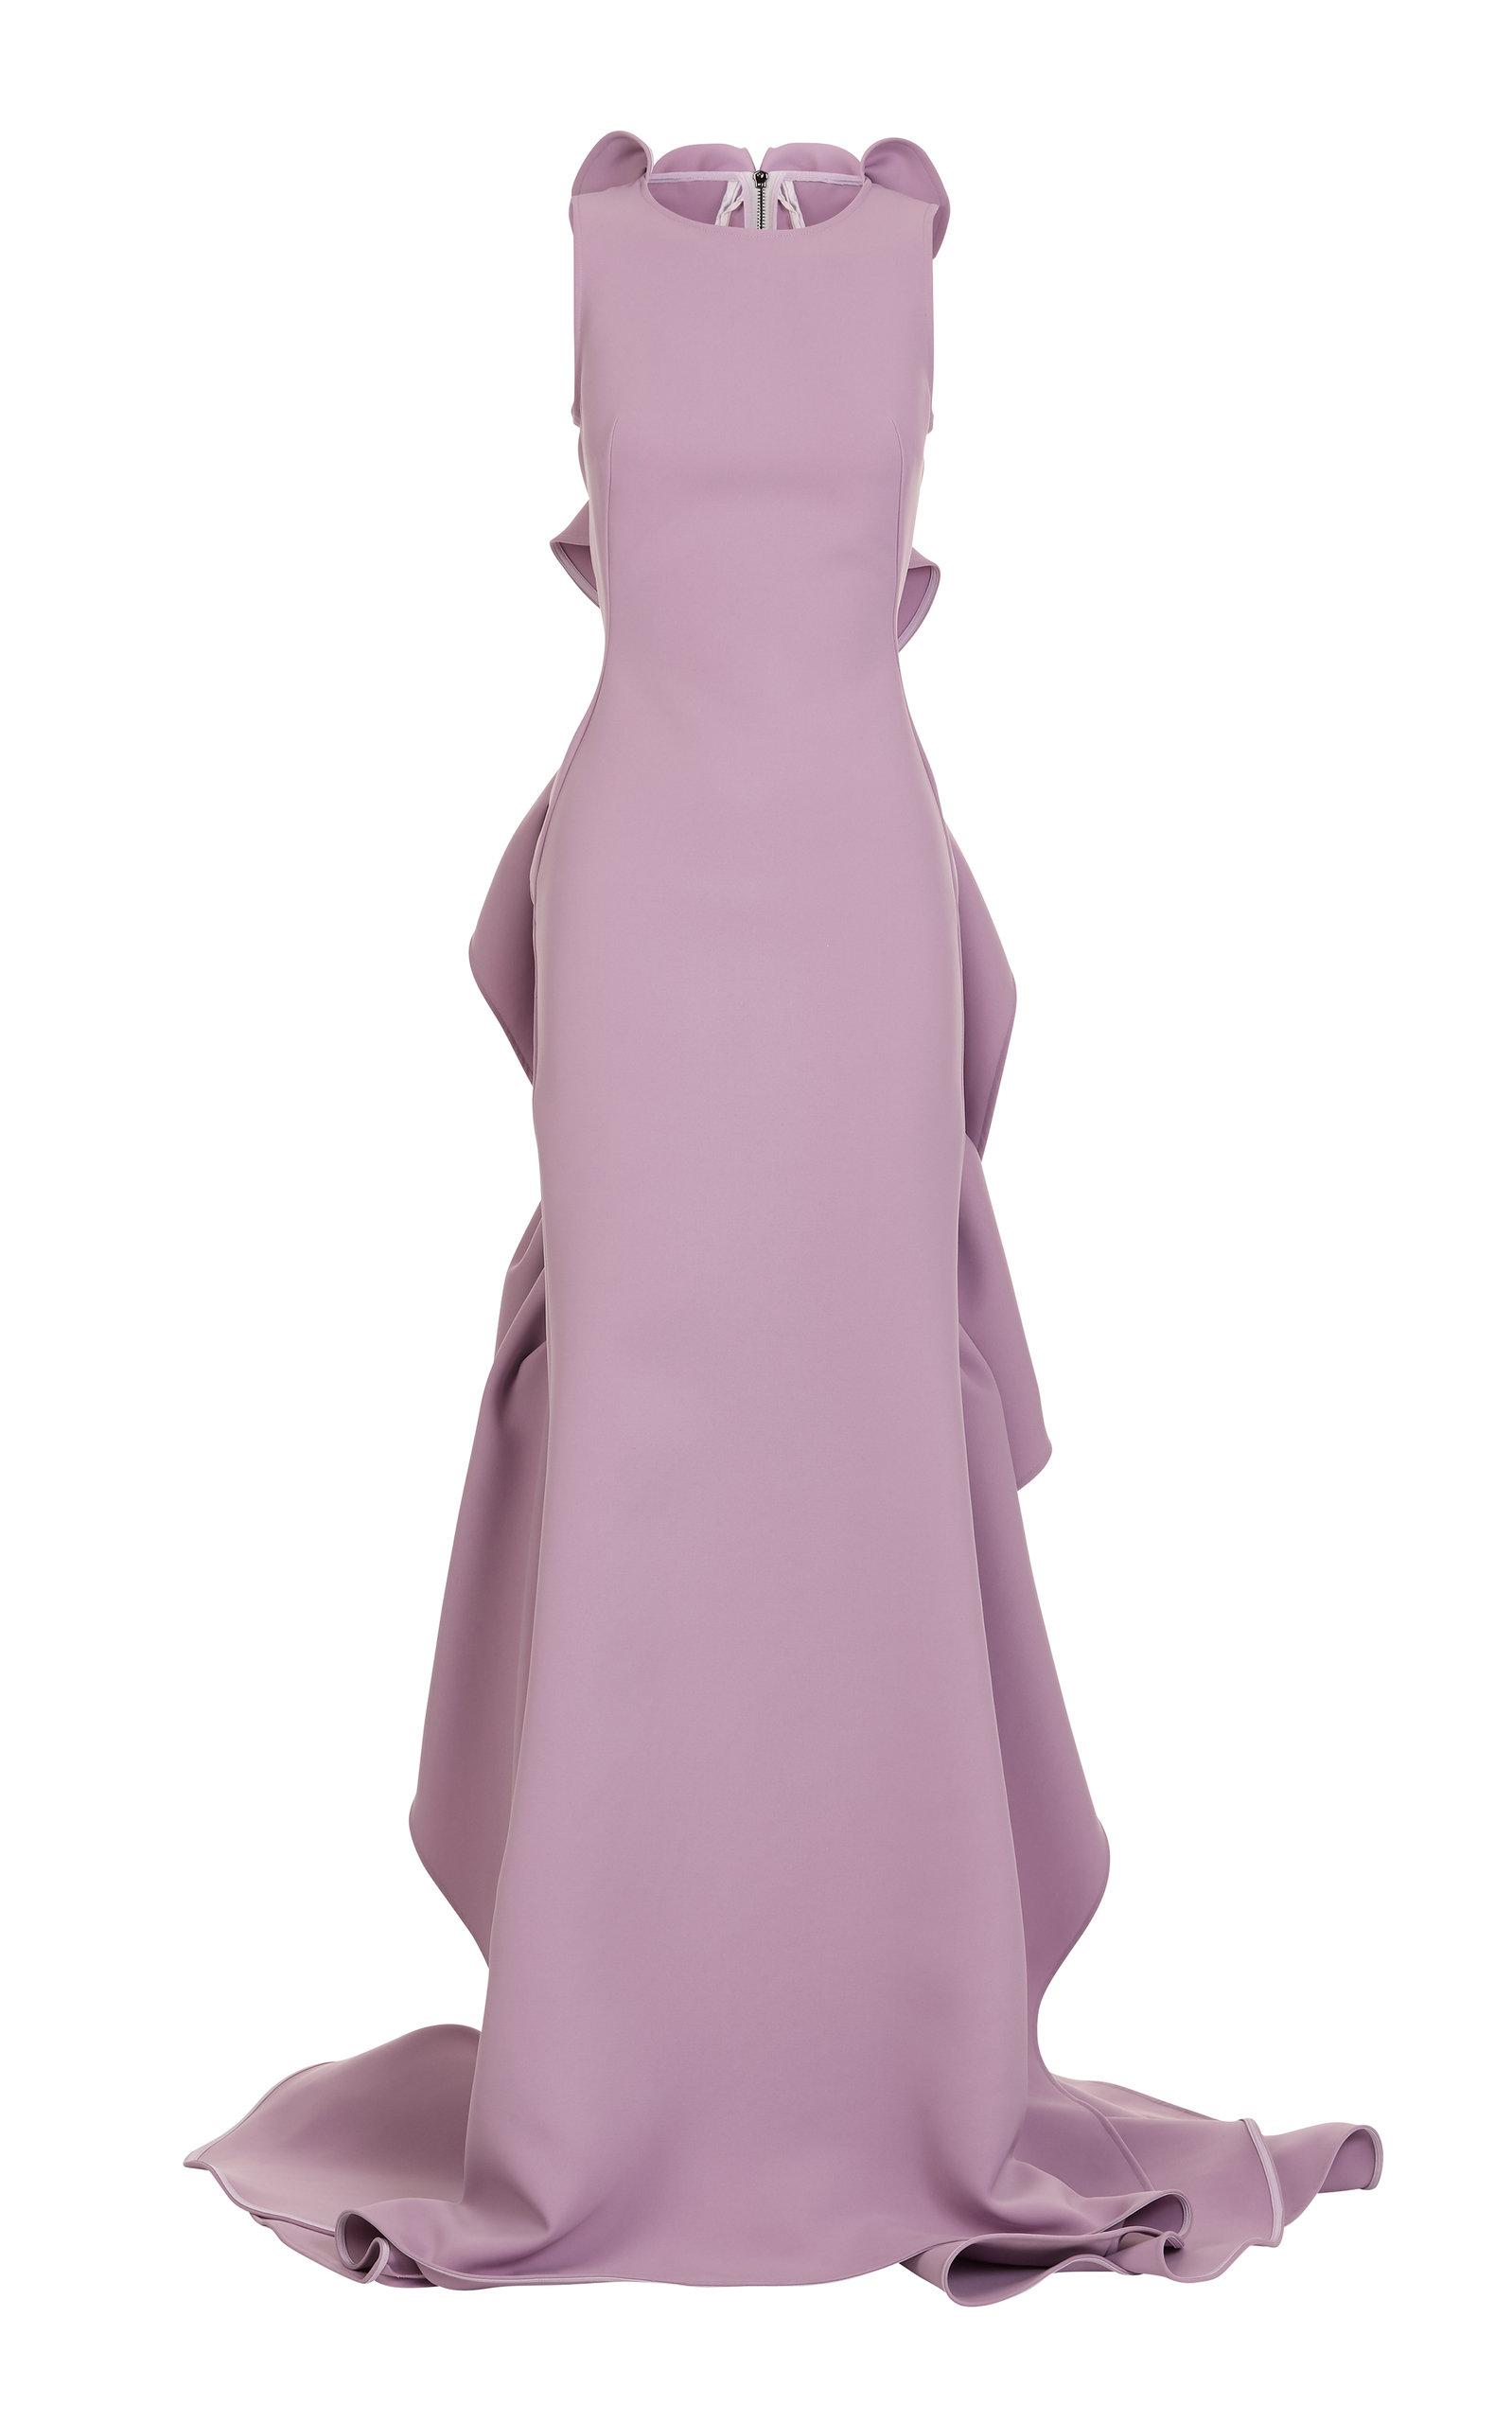 Maticevski Acaica Ruffle-back Gown in Purple | Lyst